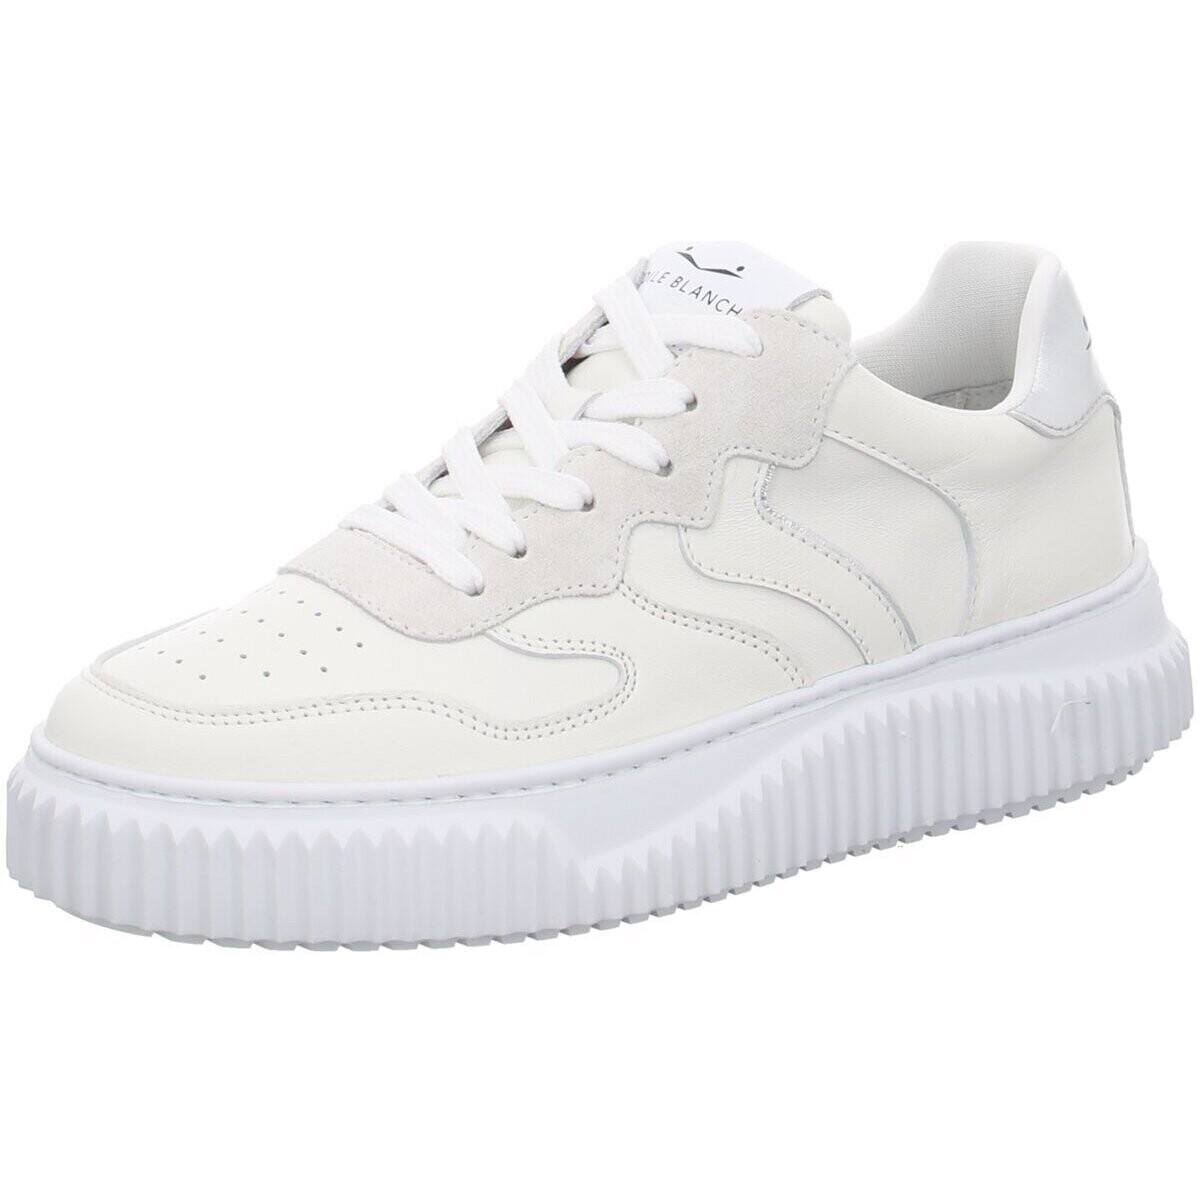 Chaussures Femme Loints Of Holla  Blanc